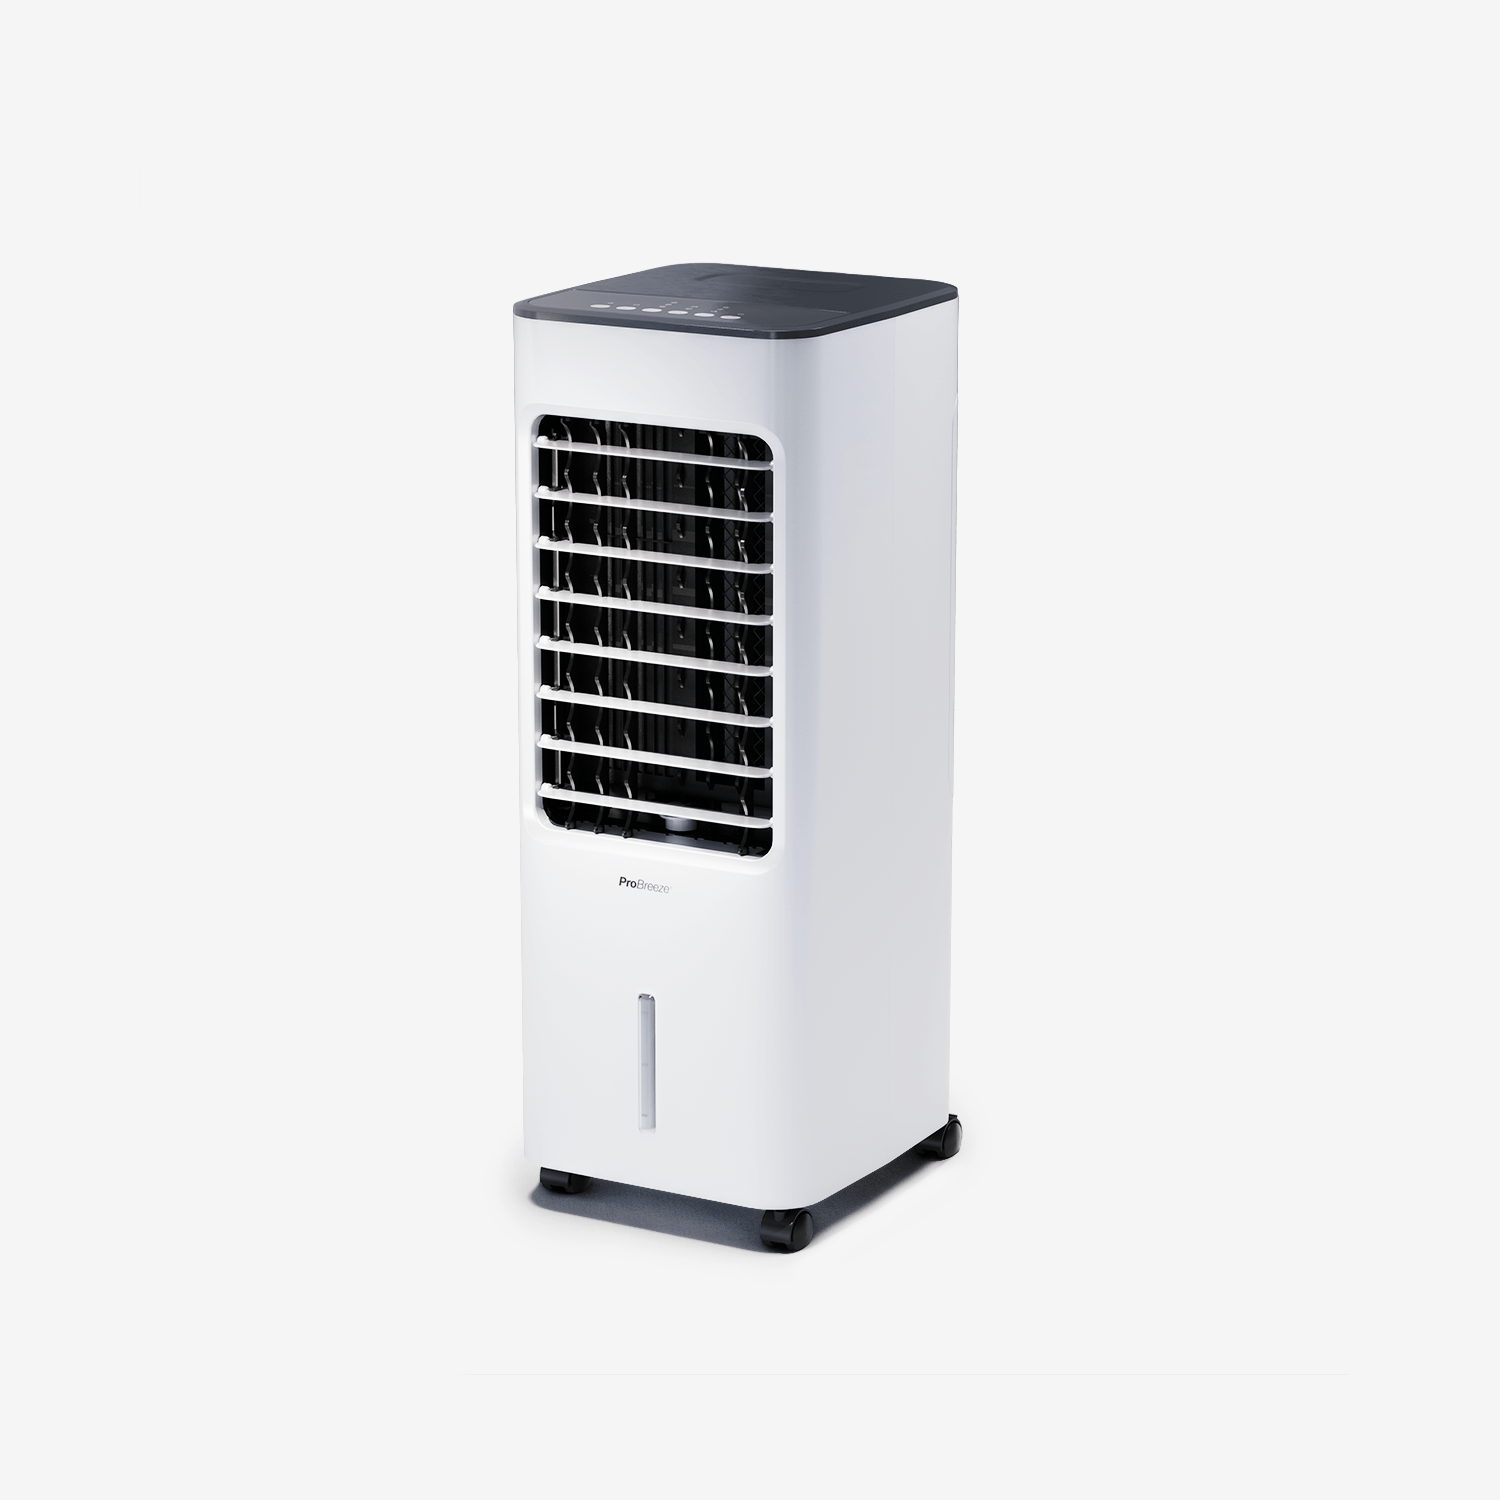 5L Portable Air Cooler with 4 Operating Modes, LED Display, Timer & Remote Control